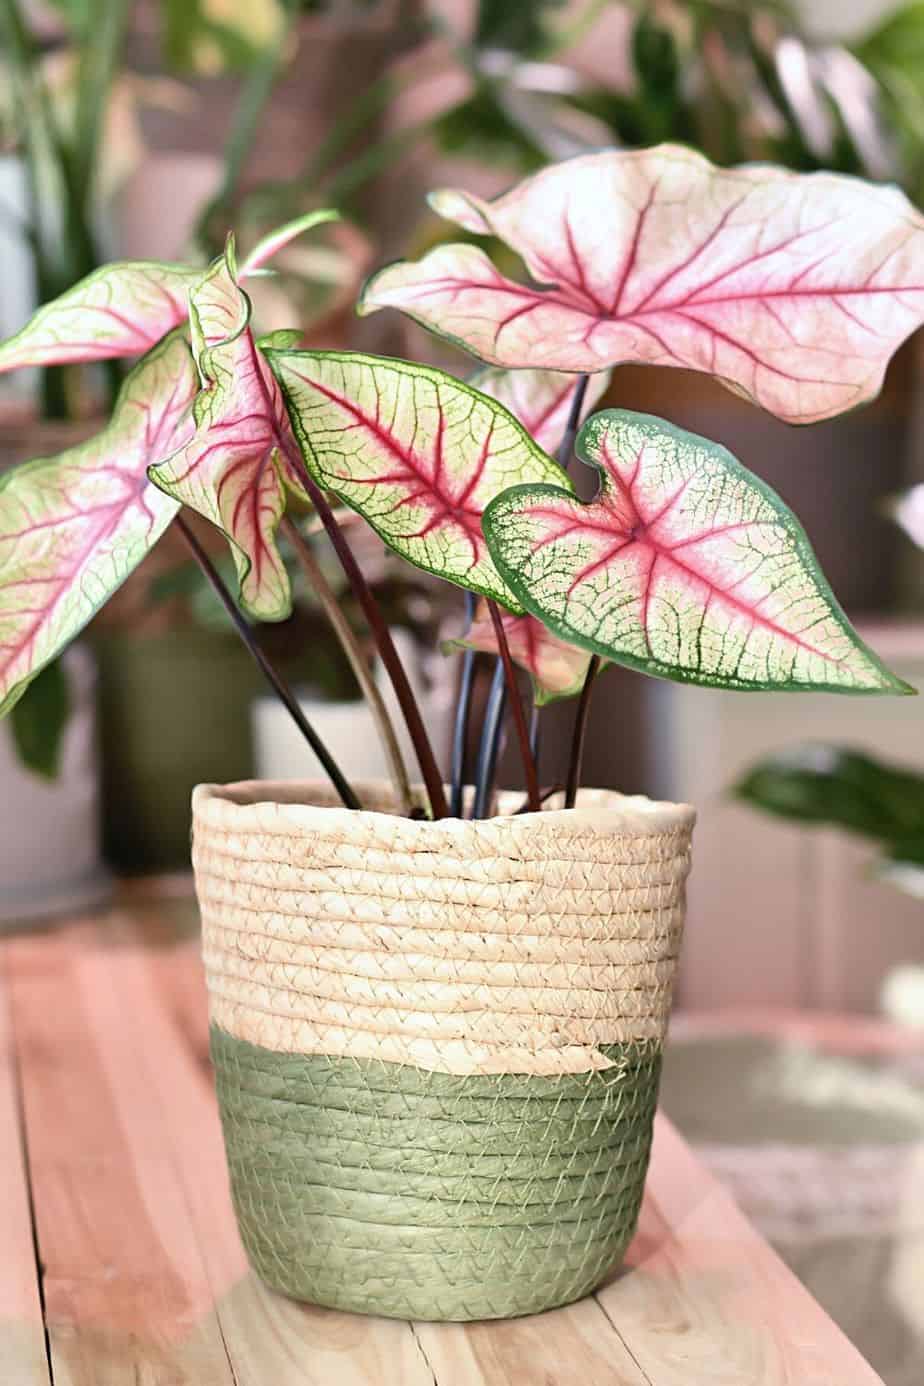 Caladium, like your Begonia and Arrowhead Vine, has oxalates that are toxic to your cats